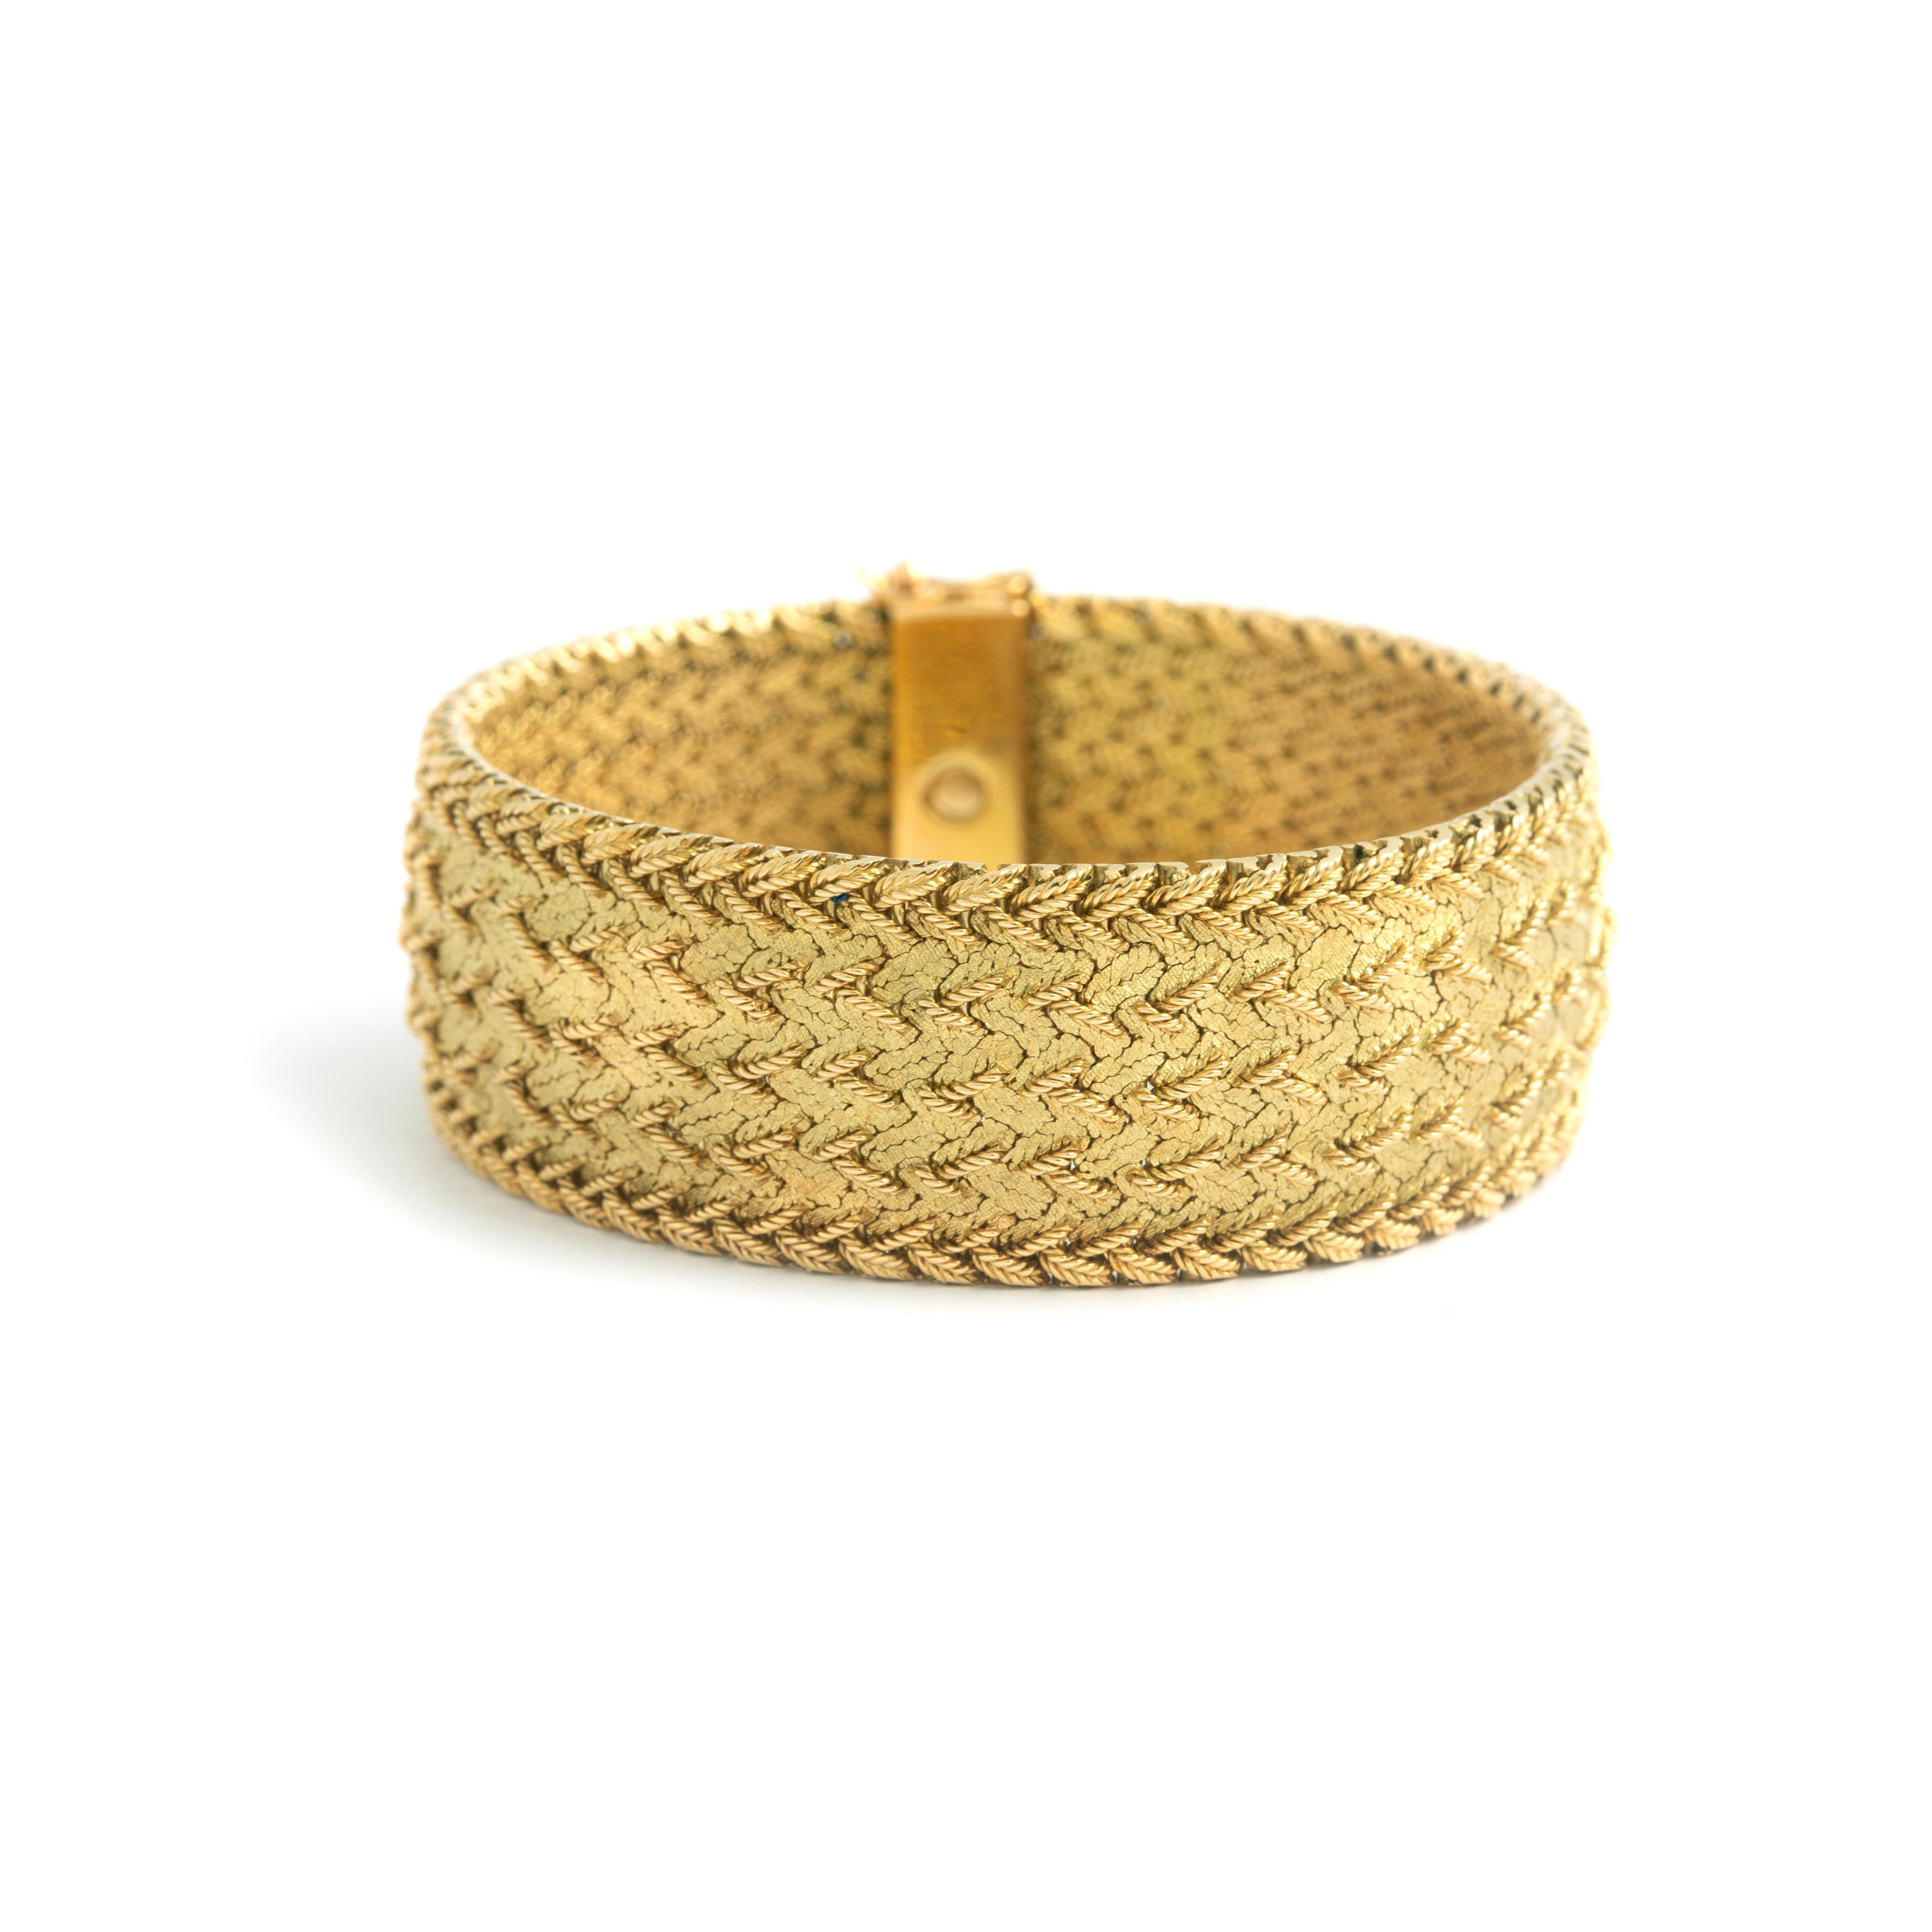 French Vintage Yellow Gold 18K Bracelet.
Circa 1960. French marks.

Length: 18.50 centimeters.
Width: 2.00 centimeters.
Thickness: approx. 0.30 centimeters.

Total gross weight: 95.08 grams.